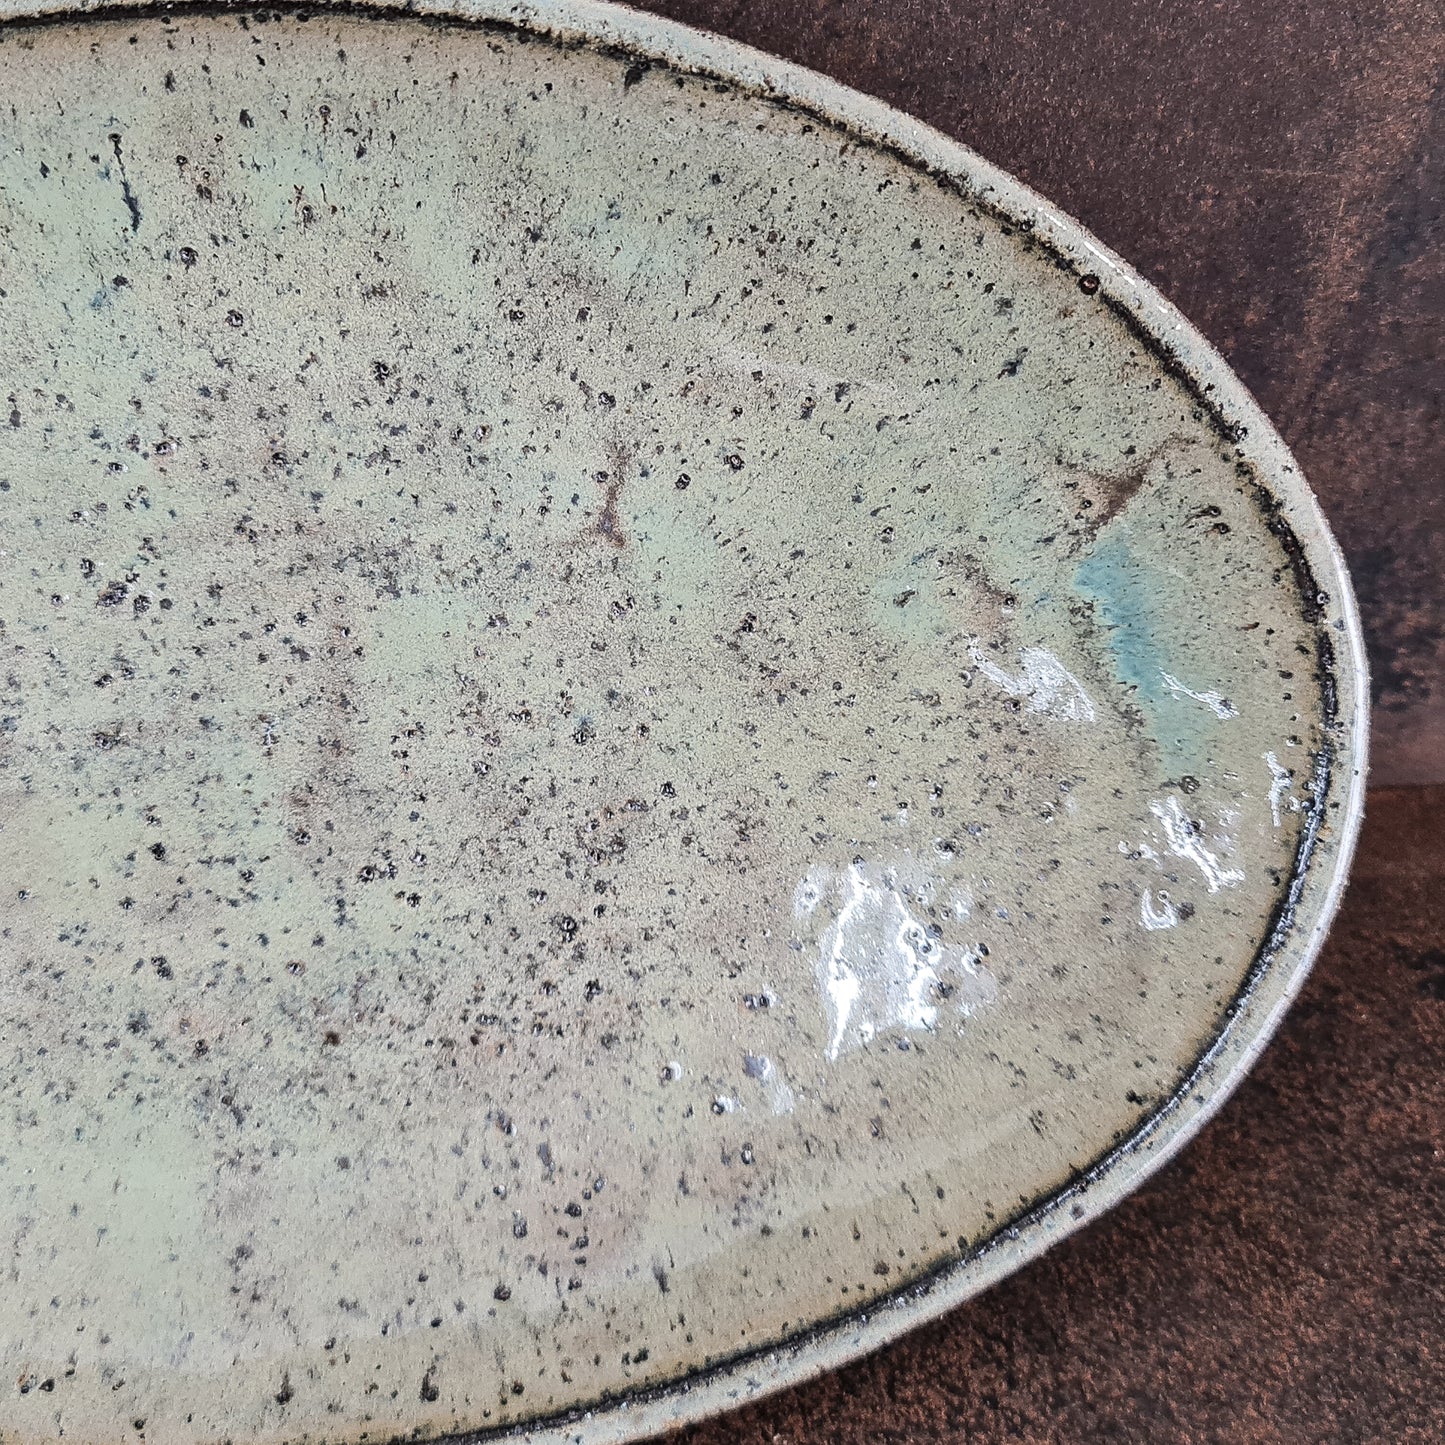 "Hint of Green" Oval Bowl